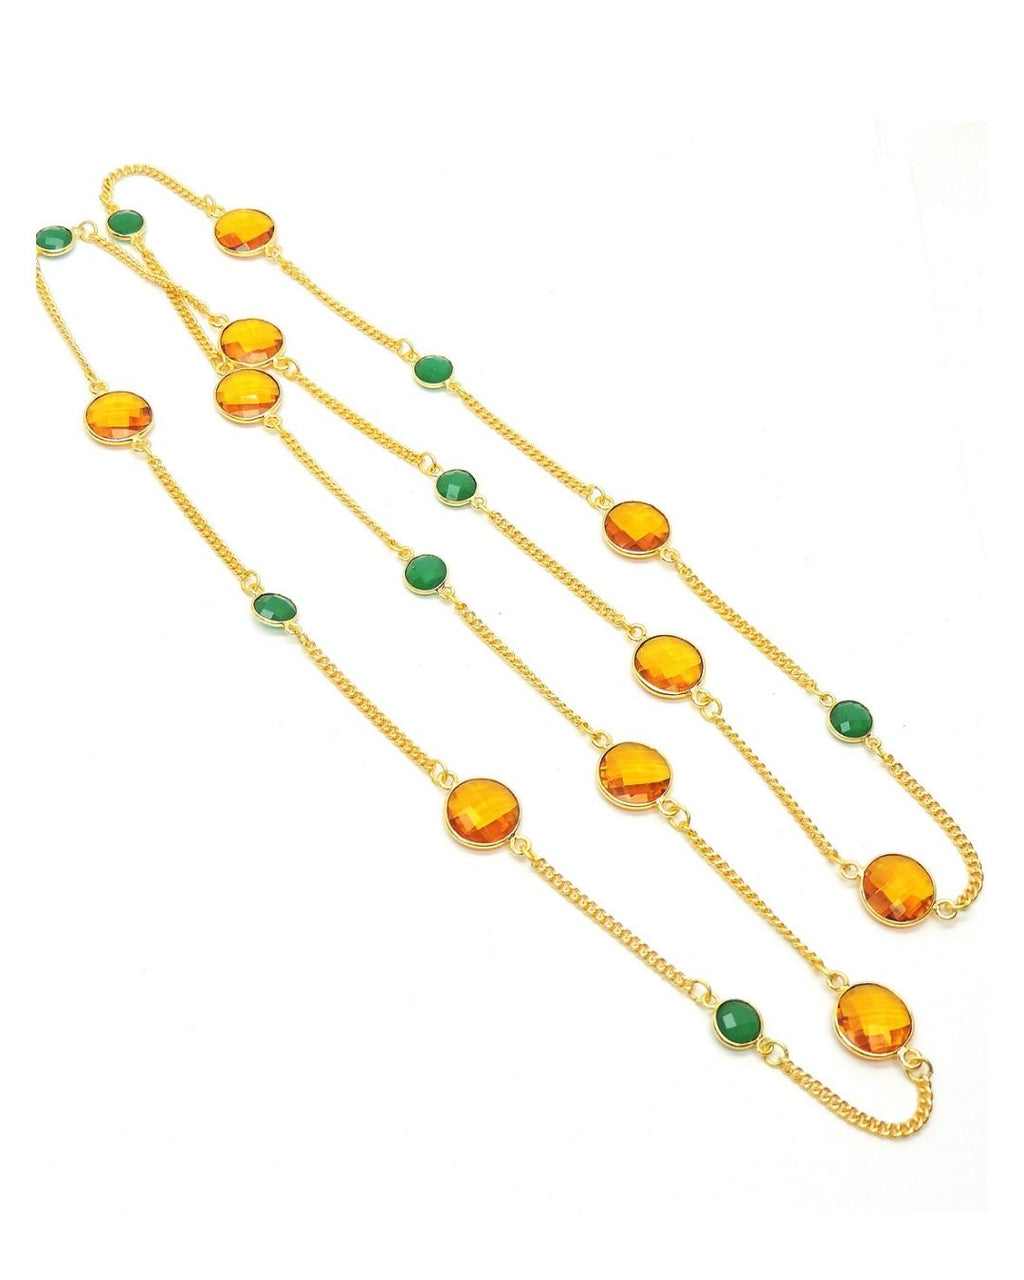 Bontu Necklace - Necklaces - Handcrafted Jewellery - Made in India - Dubai Jewellery, Fashion & Lifestyle - Dor